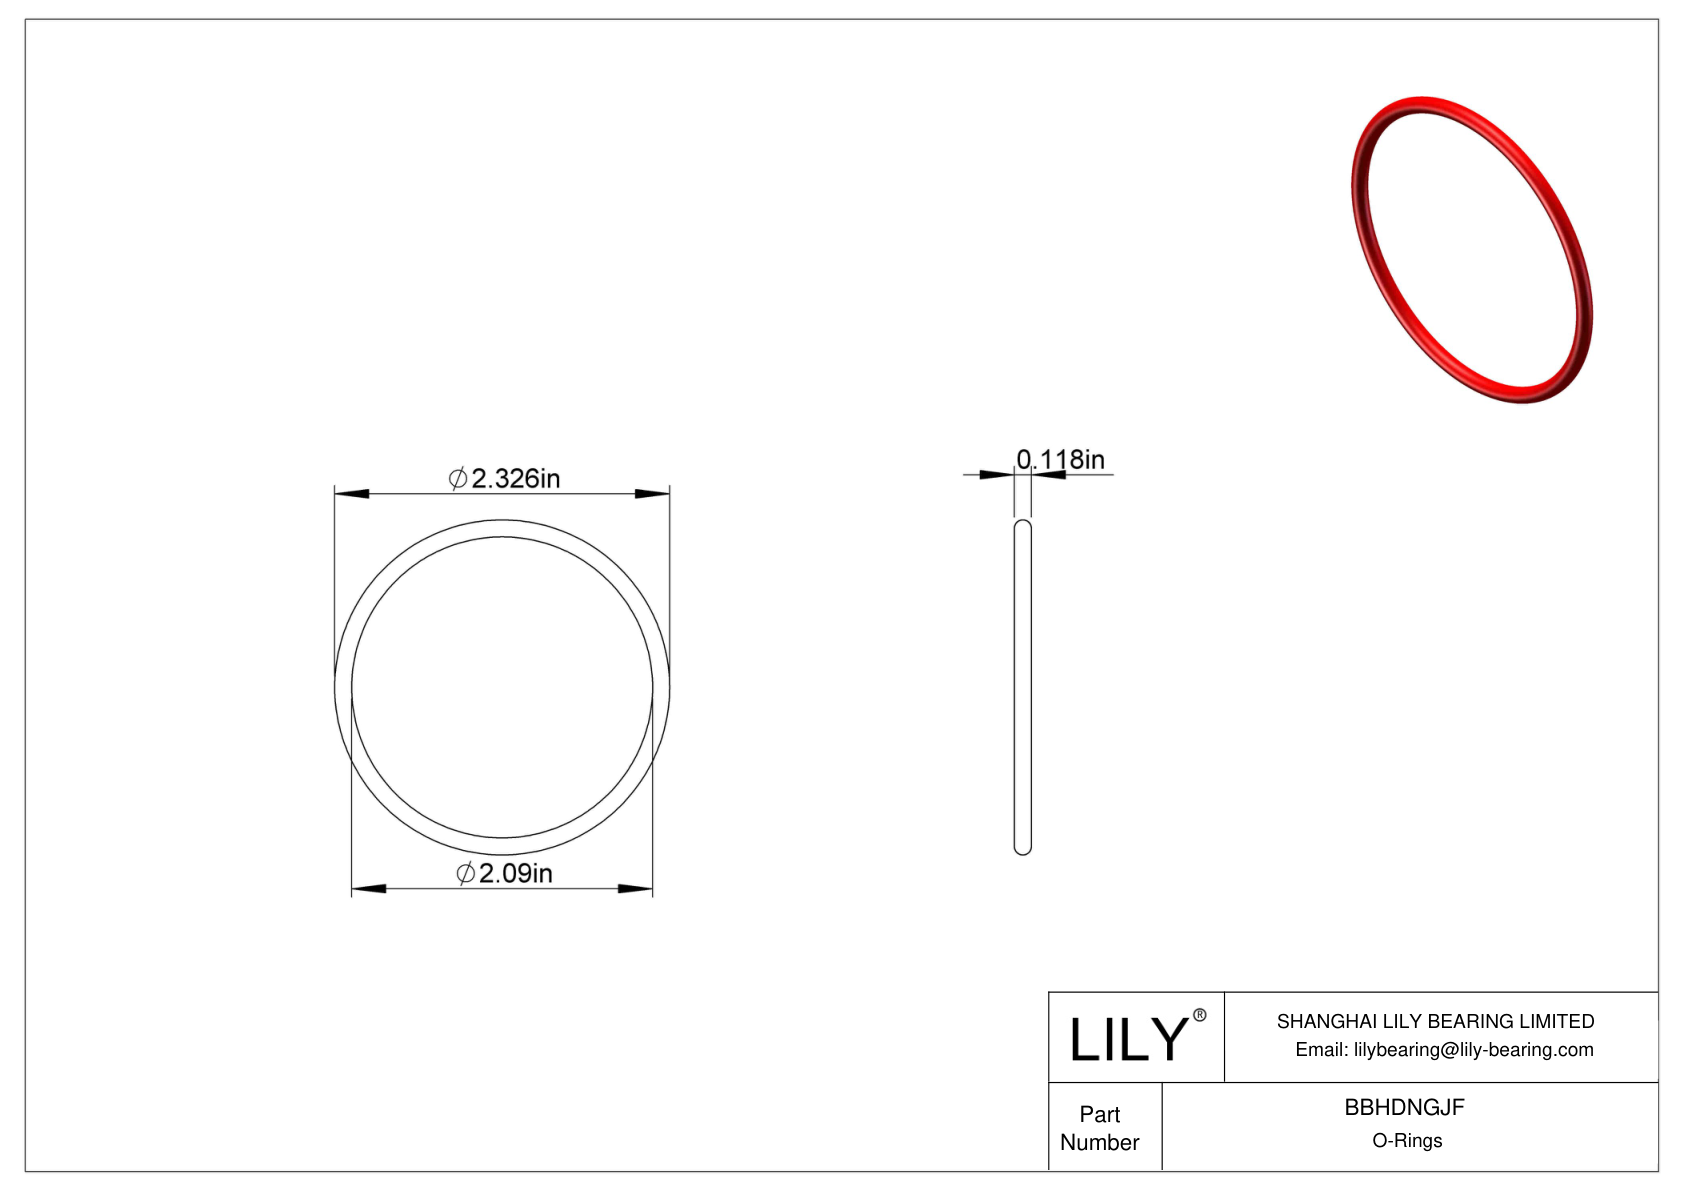 BBHDNGJF High Temperature O-Rings Round cad drawing